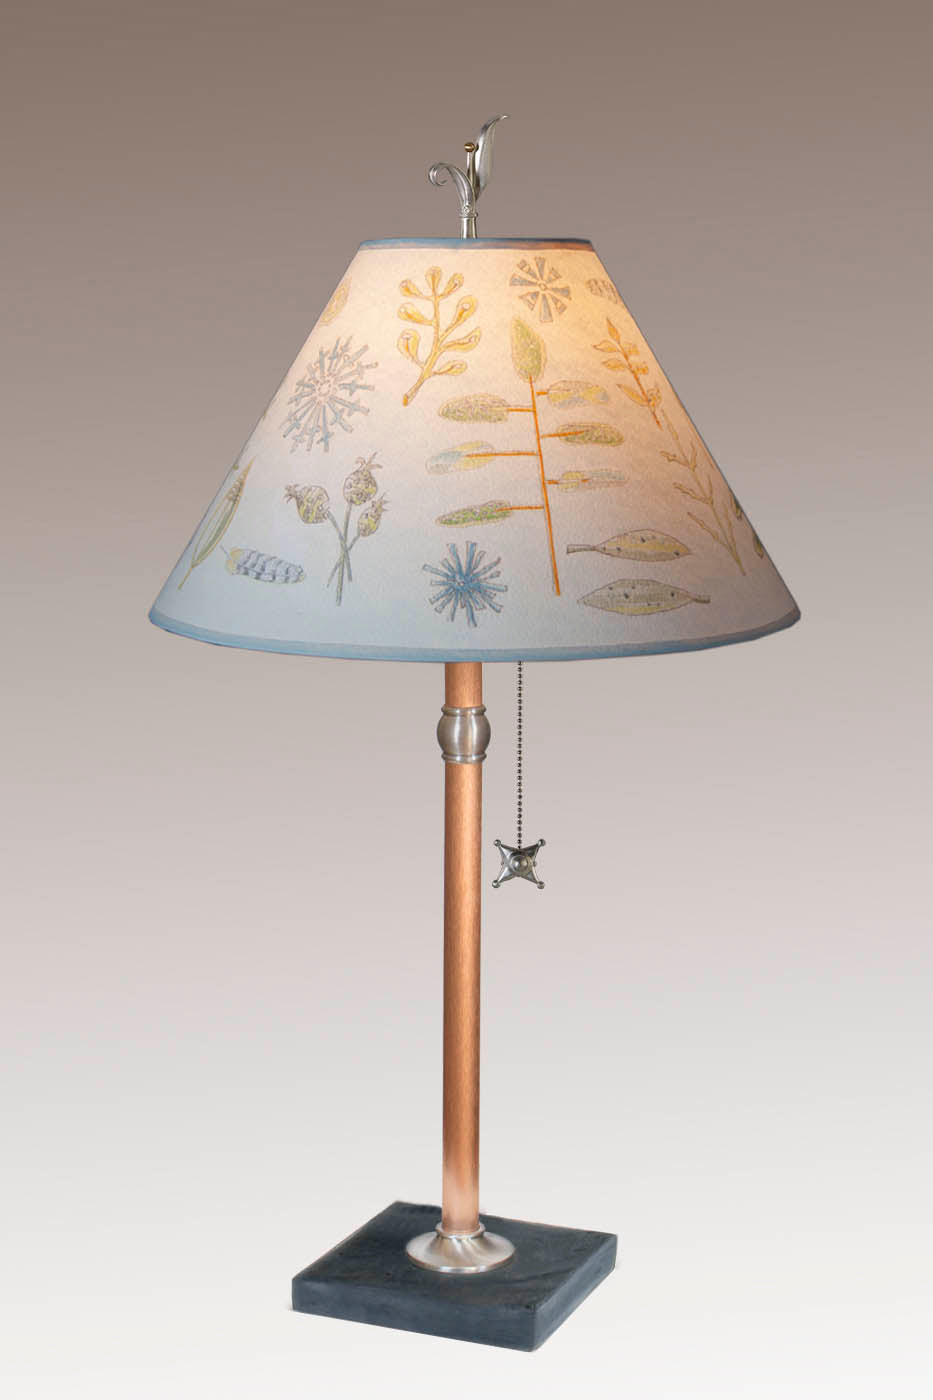 Janna Ugone &amp; Co Table Lamp Copper Table Lamp with Medium Conical Shade in Field Chart